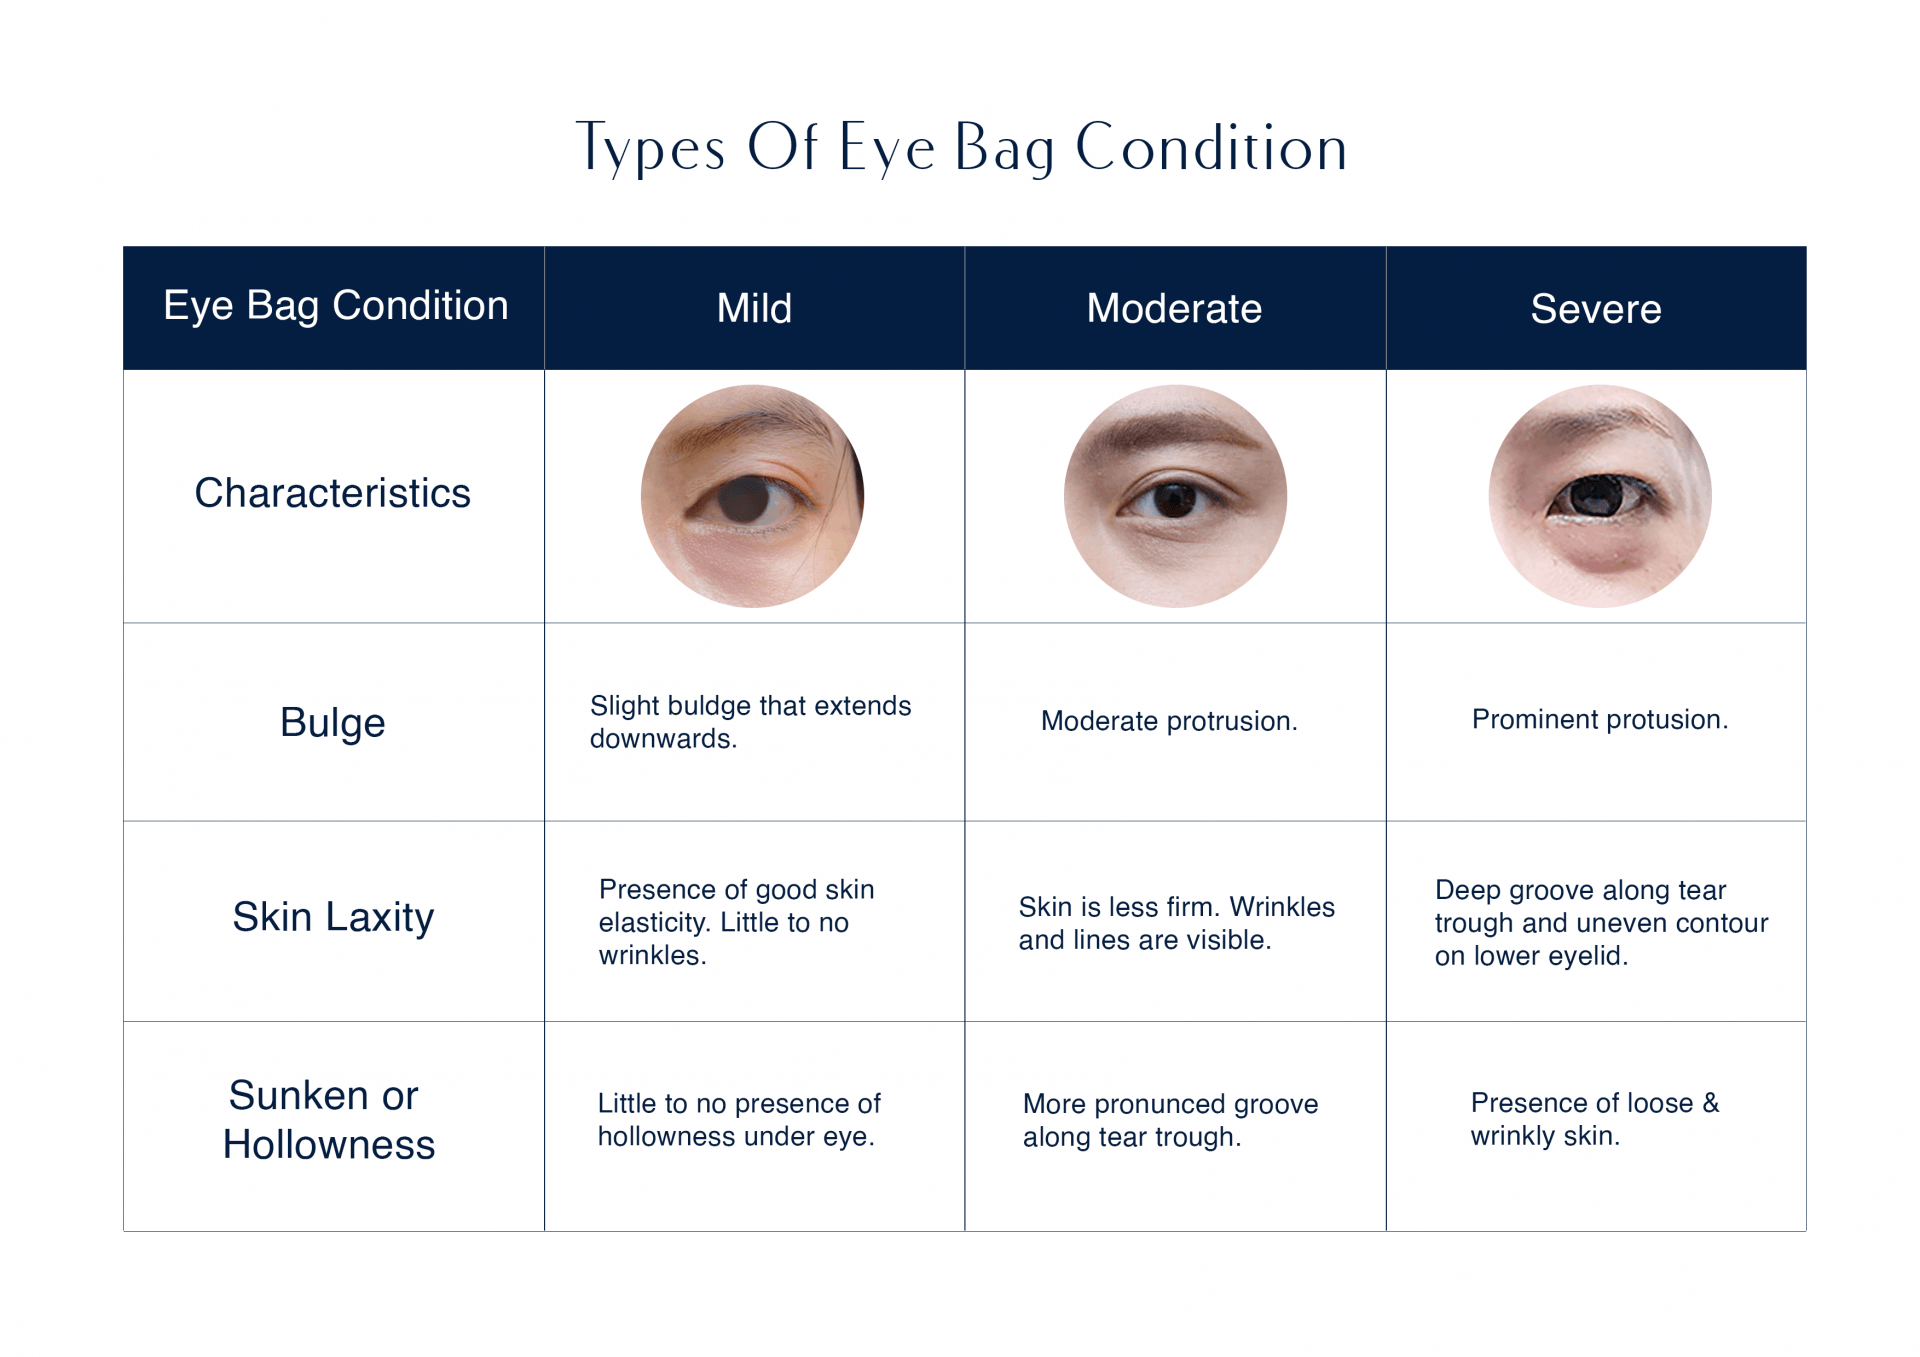 Types of eye bag conditions